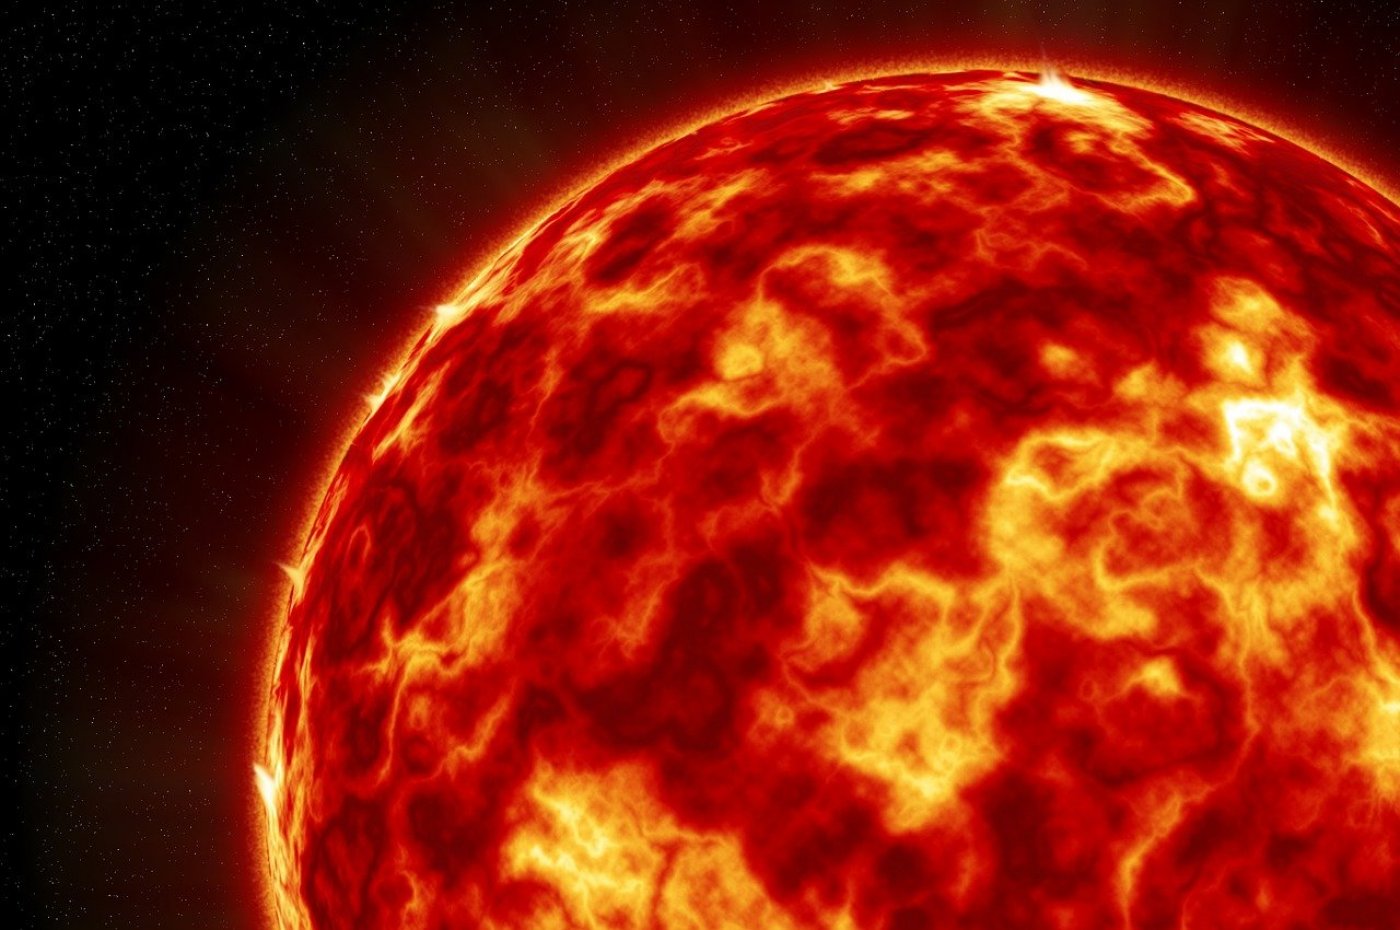 An image of the sun